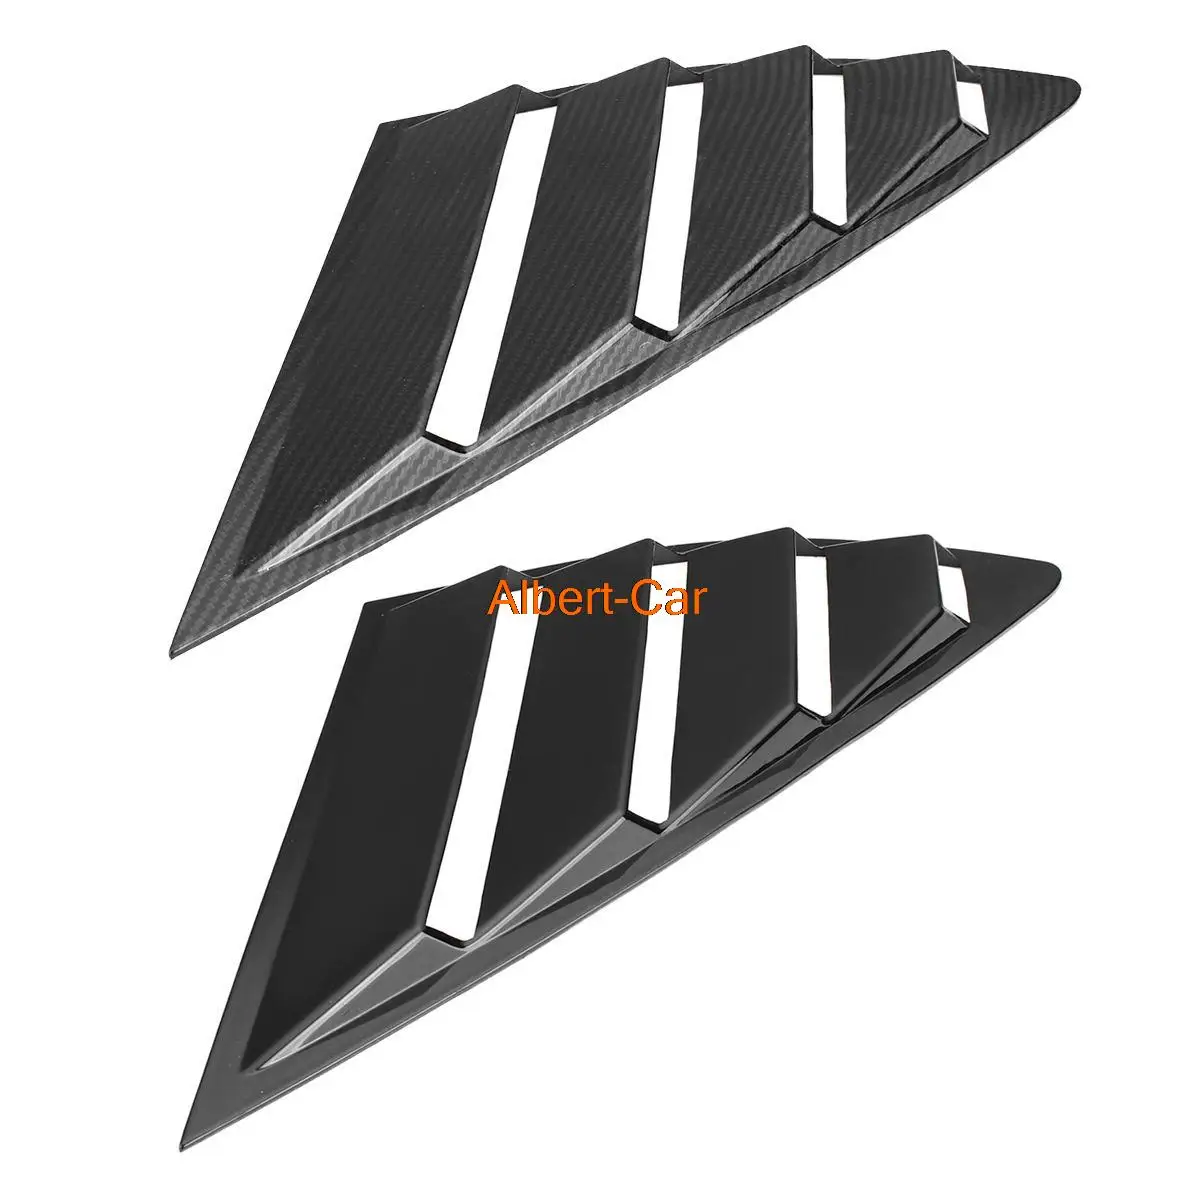 

Pair Quarter Louver Cover Vents Rear Side Window Car Styling For Ford Fusion for Mondeo 2013 2014 2015 2016 2017 2018